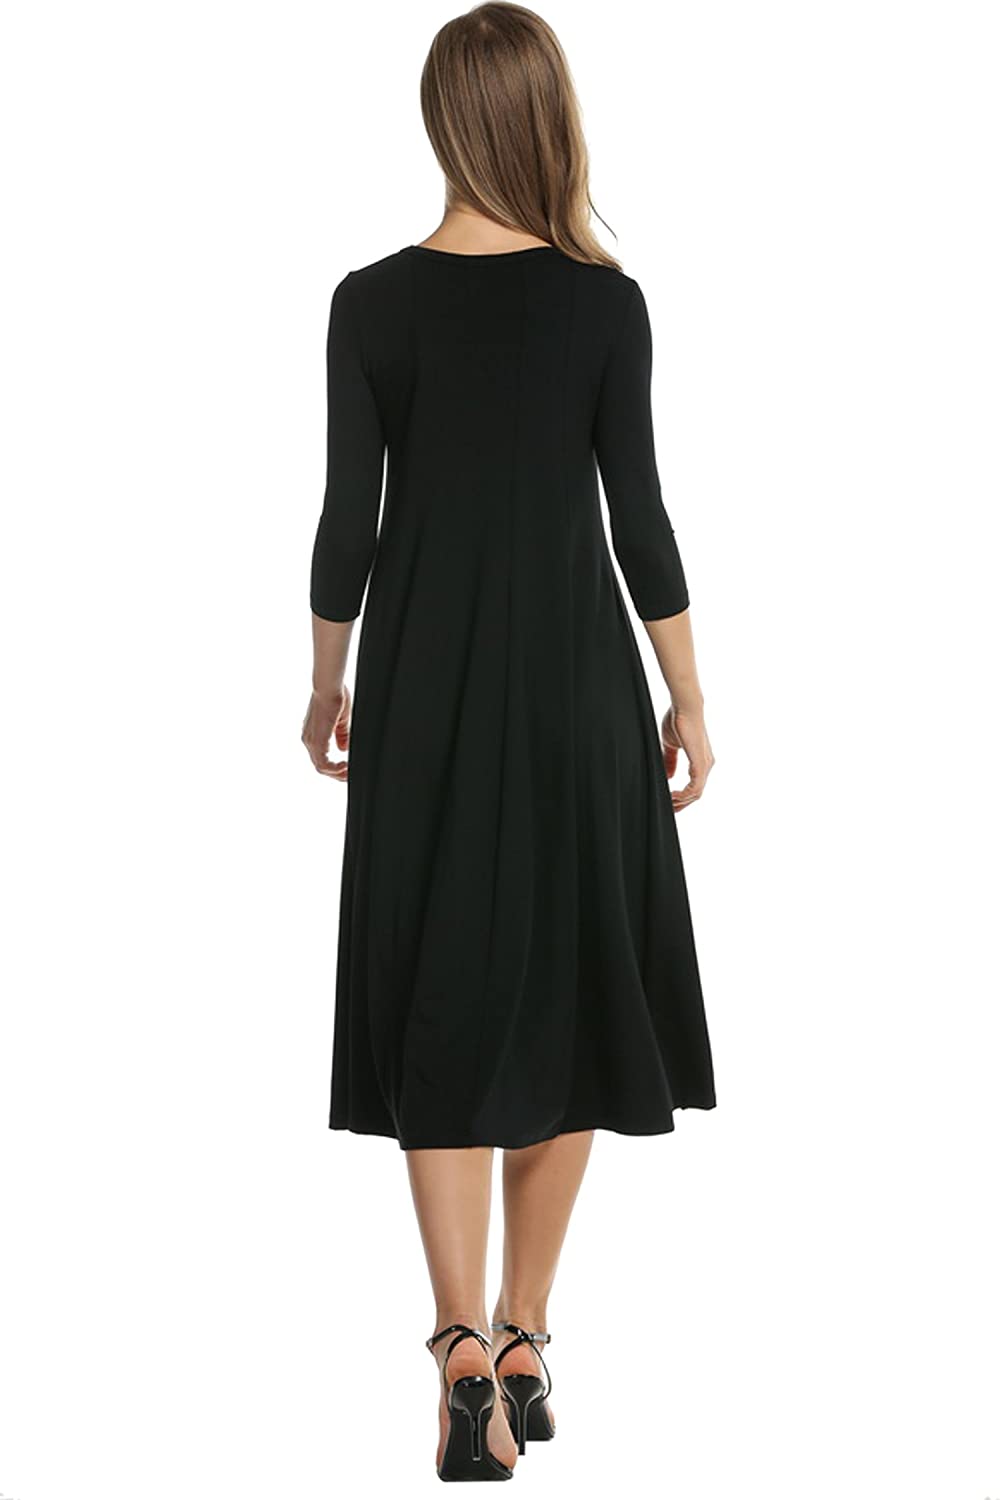 Hotouch Women's 3/4 Sleeve A-line and Flare Midi Long Dress | eBay